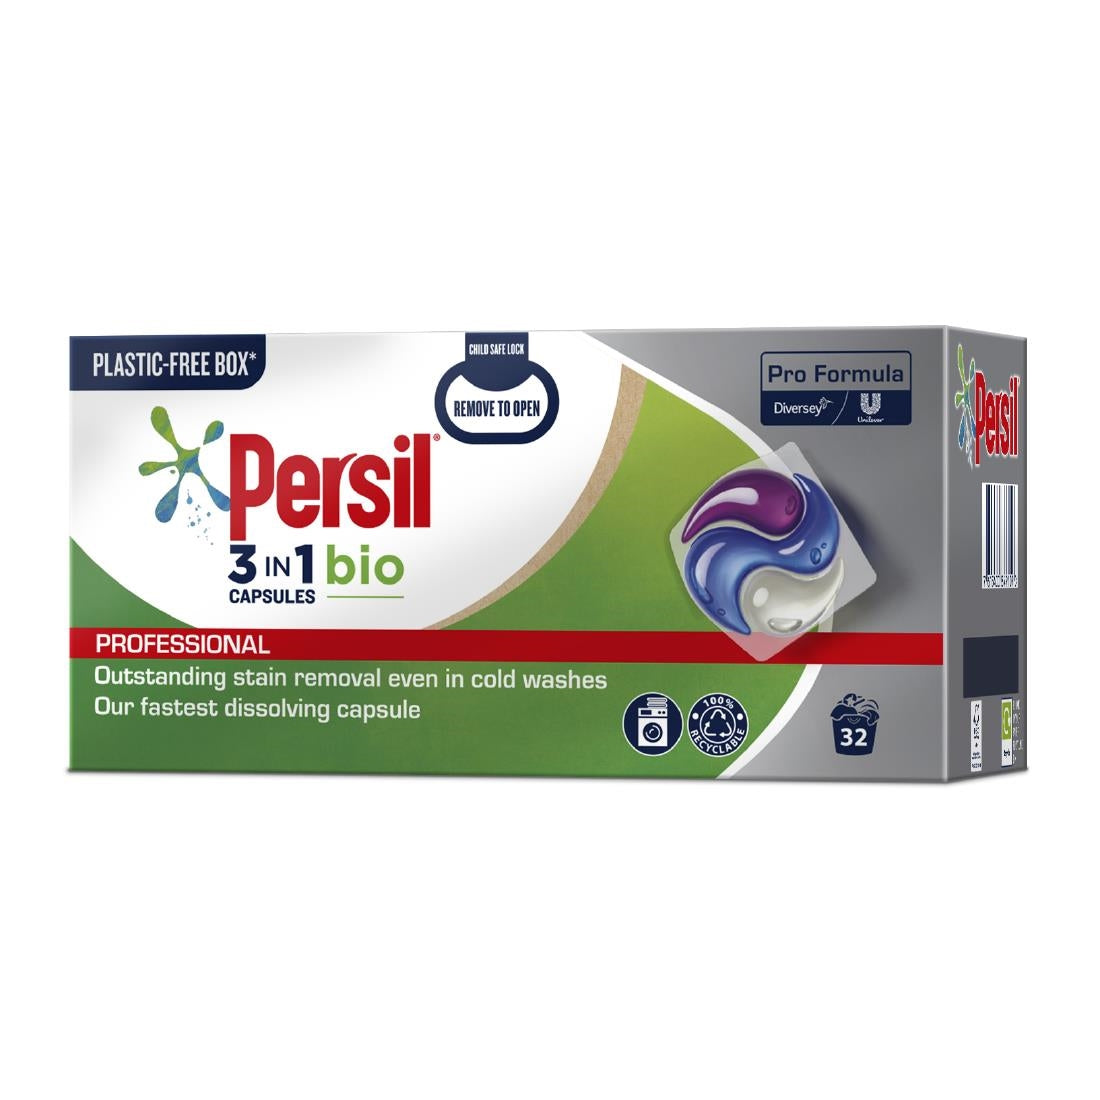 GR915 Persil Pro-Formula 3in1 Bio Laundry Capsules (Pack of 3x32)